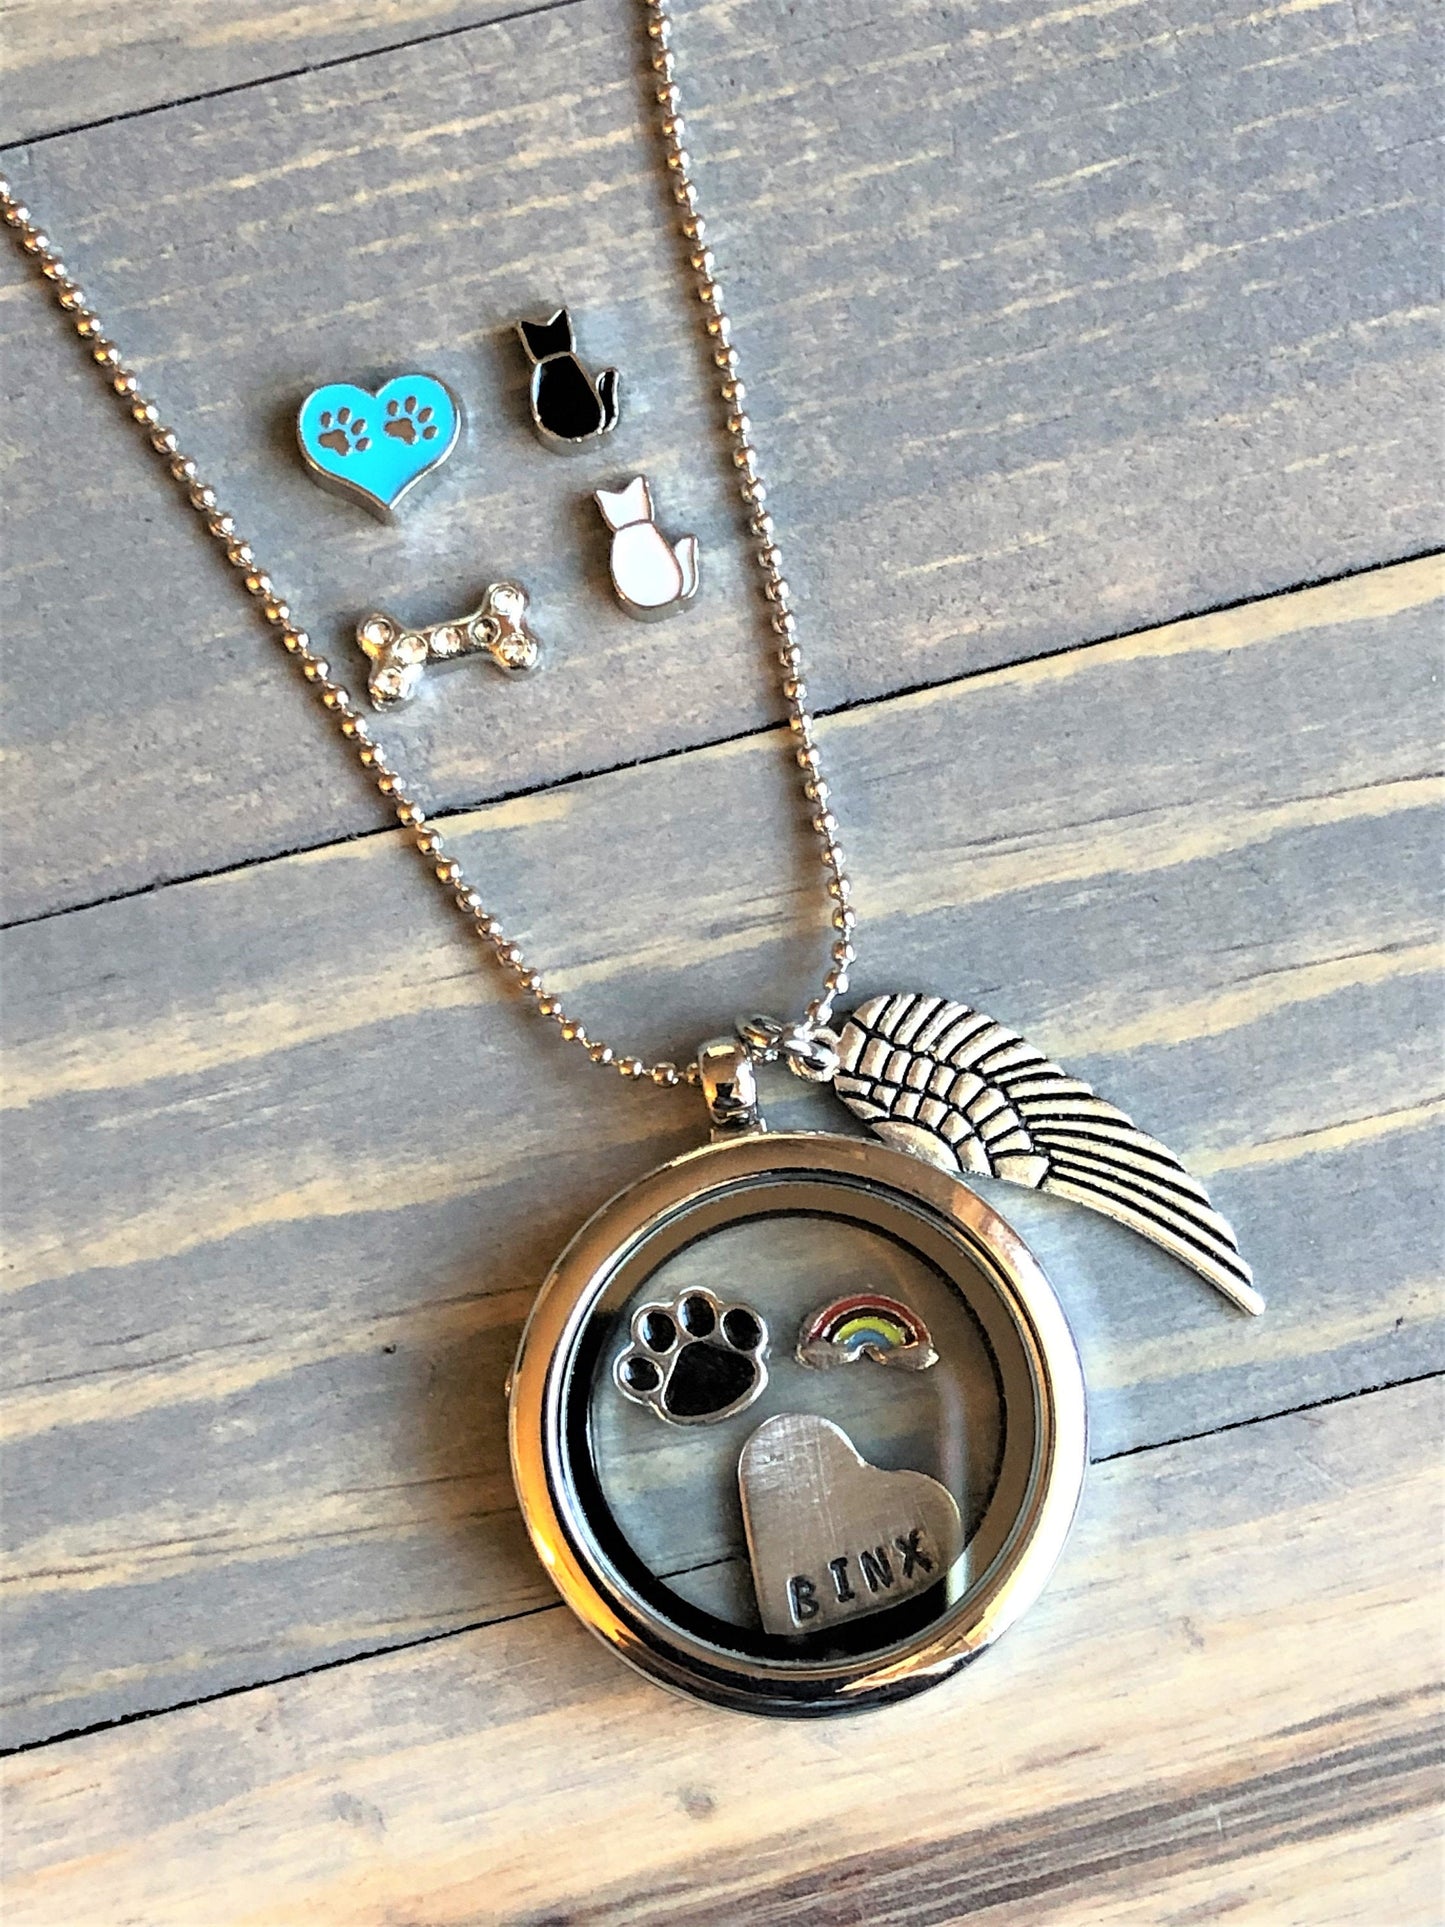 Pet Loss Necklace, Pet Memorial Gift, Glass Floating Locket for Fur Ashes Picture, Loss of Pet, Gift for Loss of Dog, pet remembrance